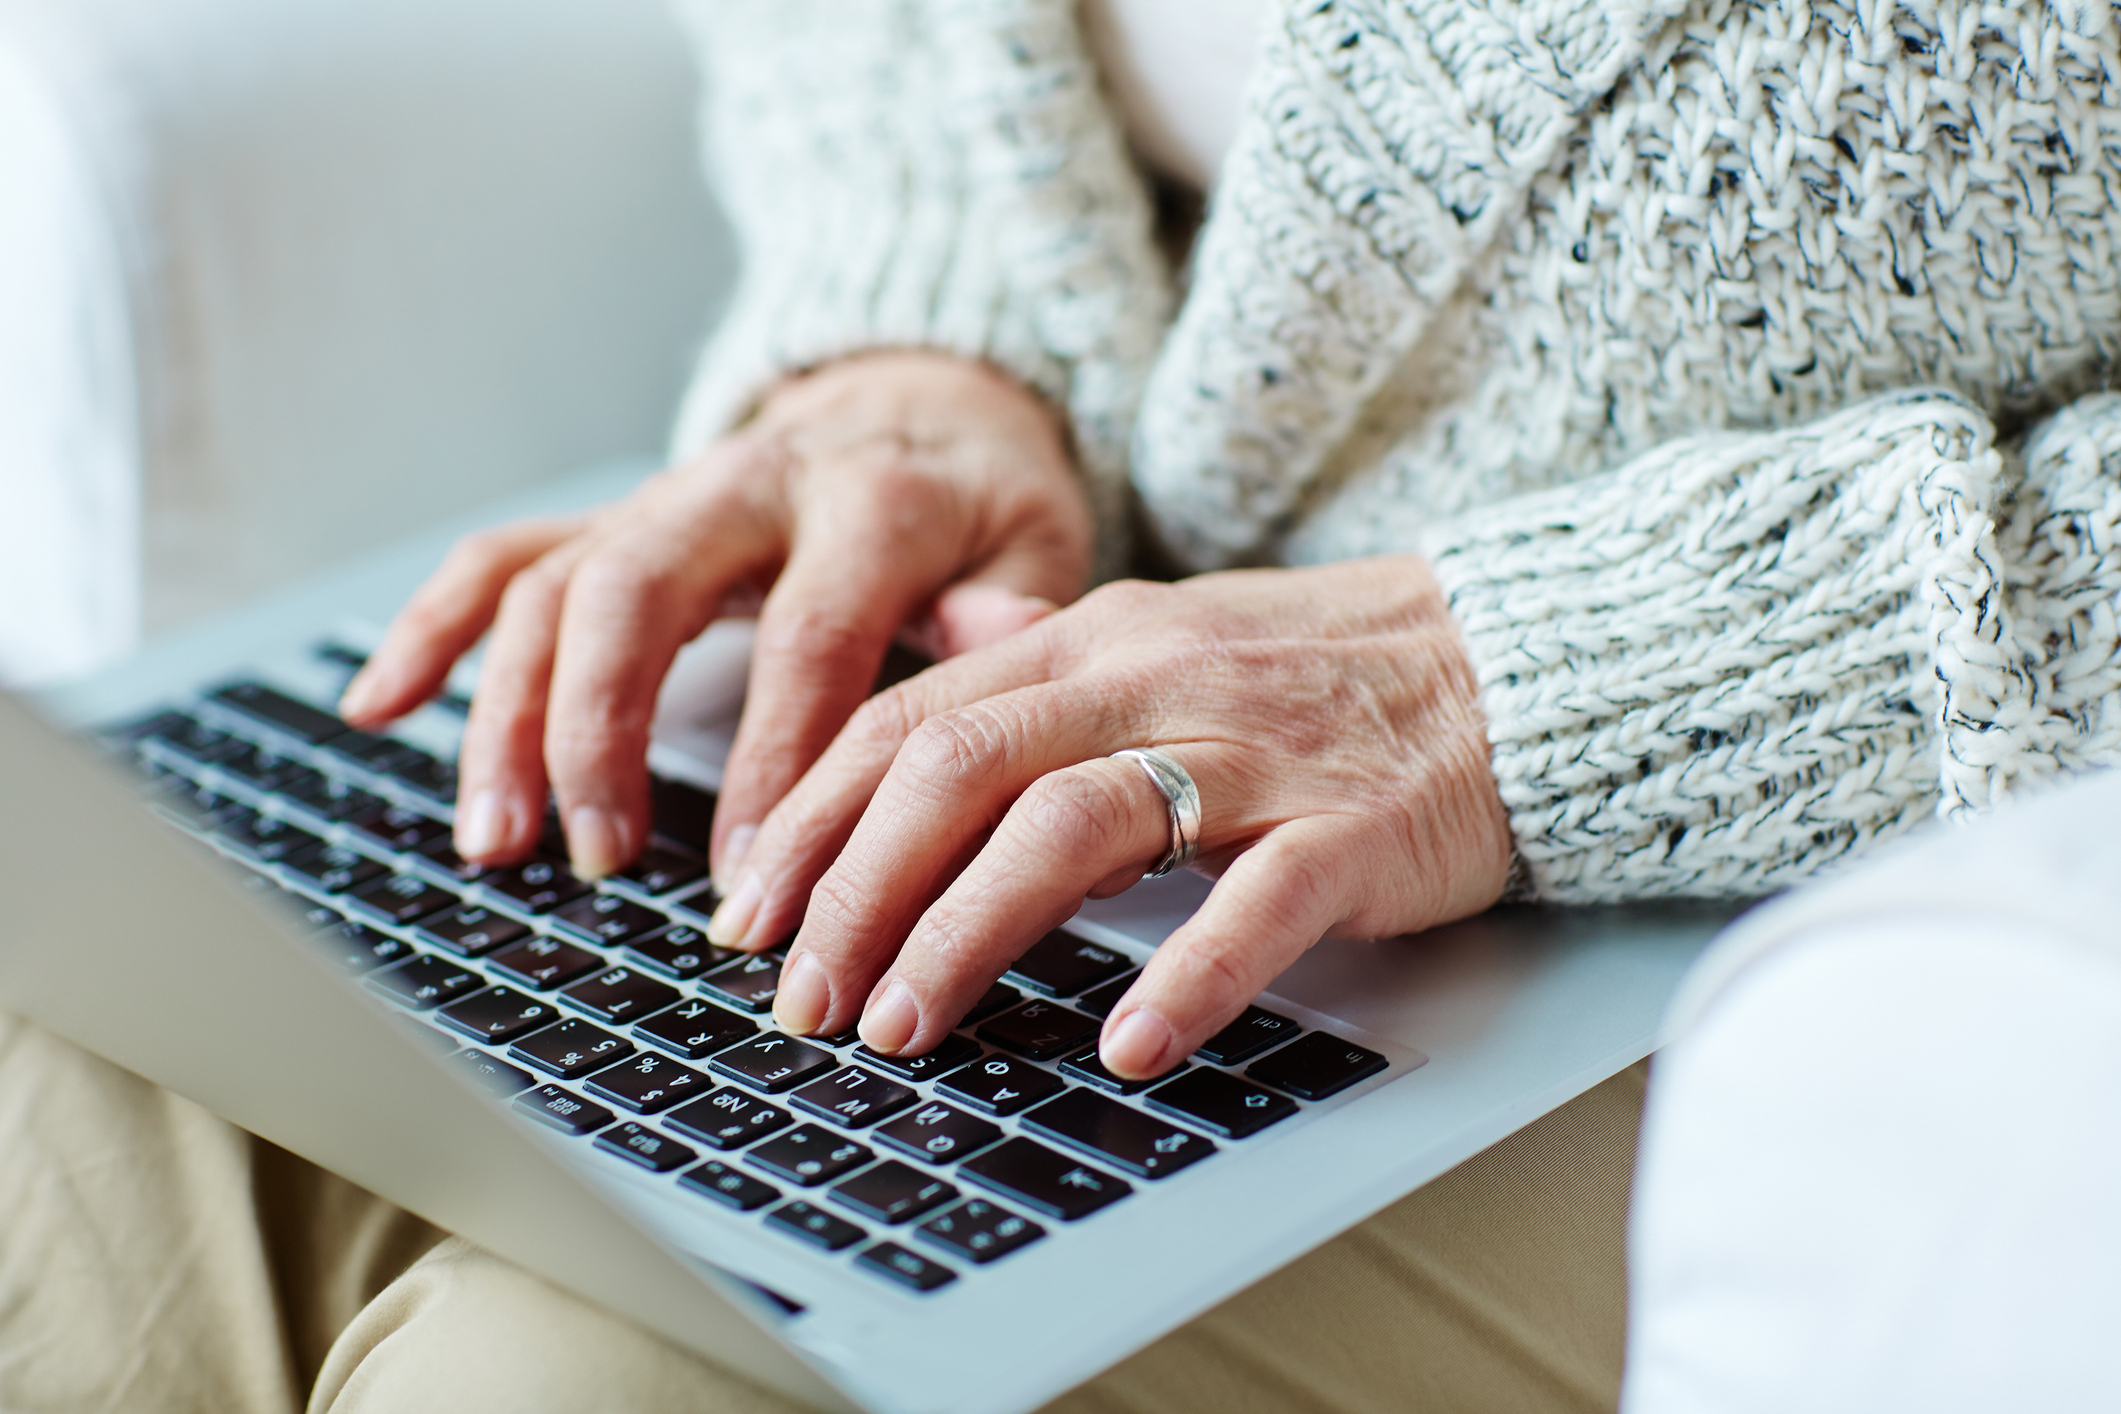 Closeup of an elderly white woman's hands, one wearing a silver ring, as she struggles to type while balancing a laptop in her lap